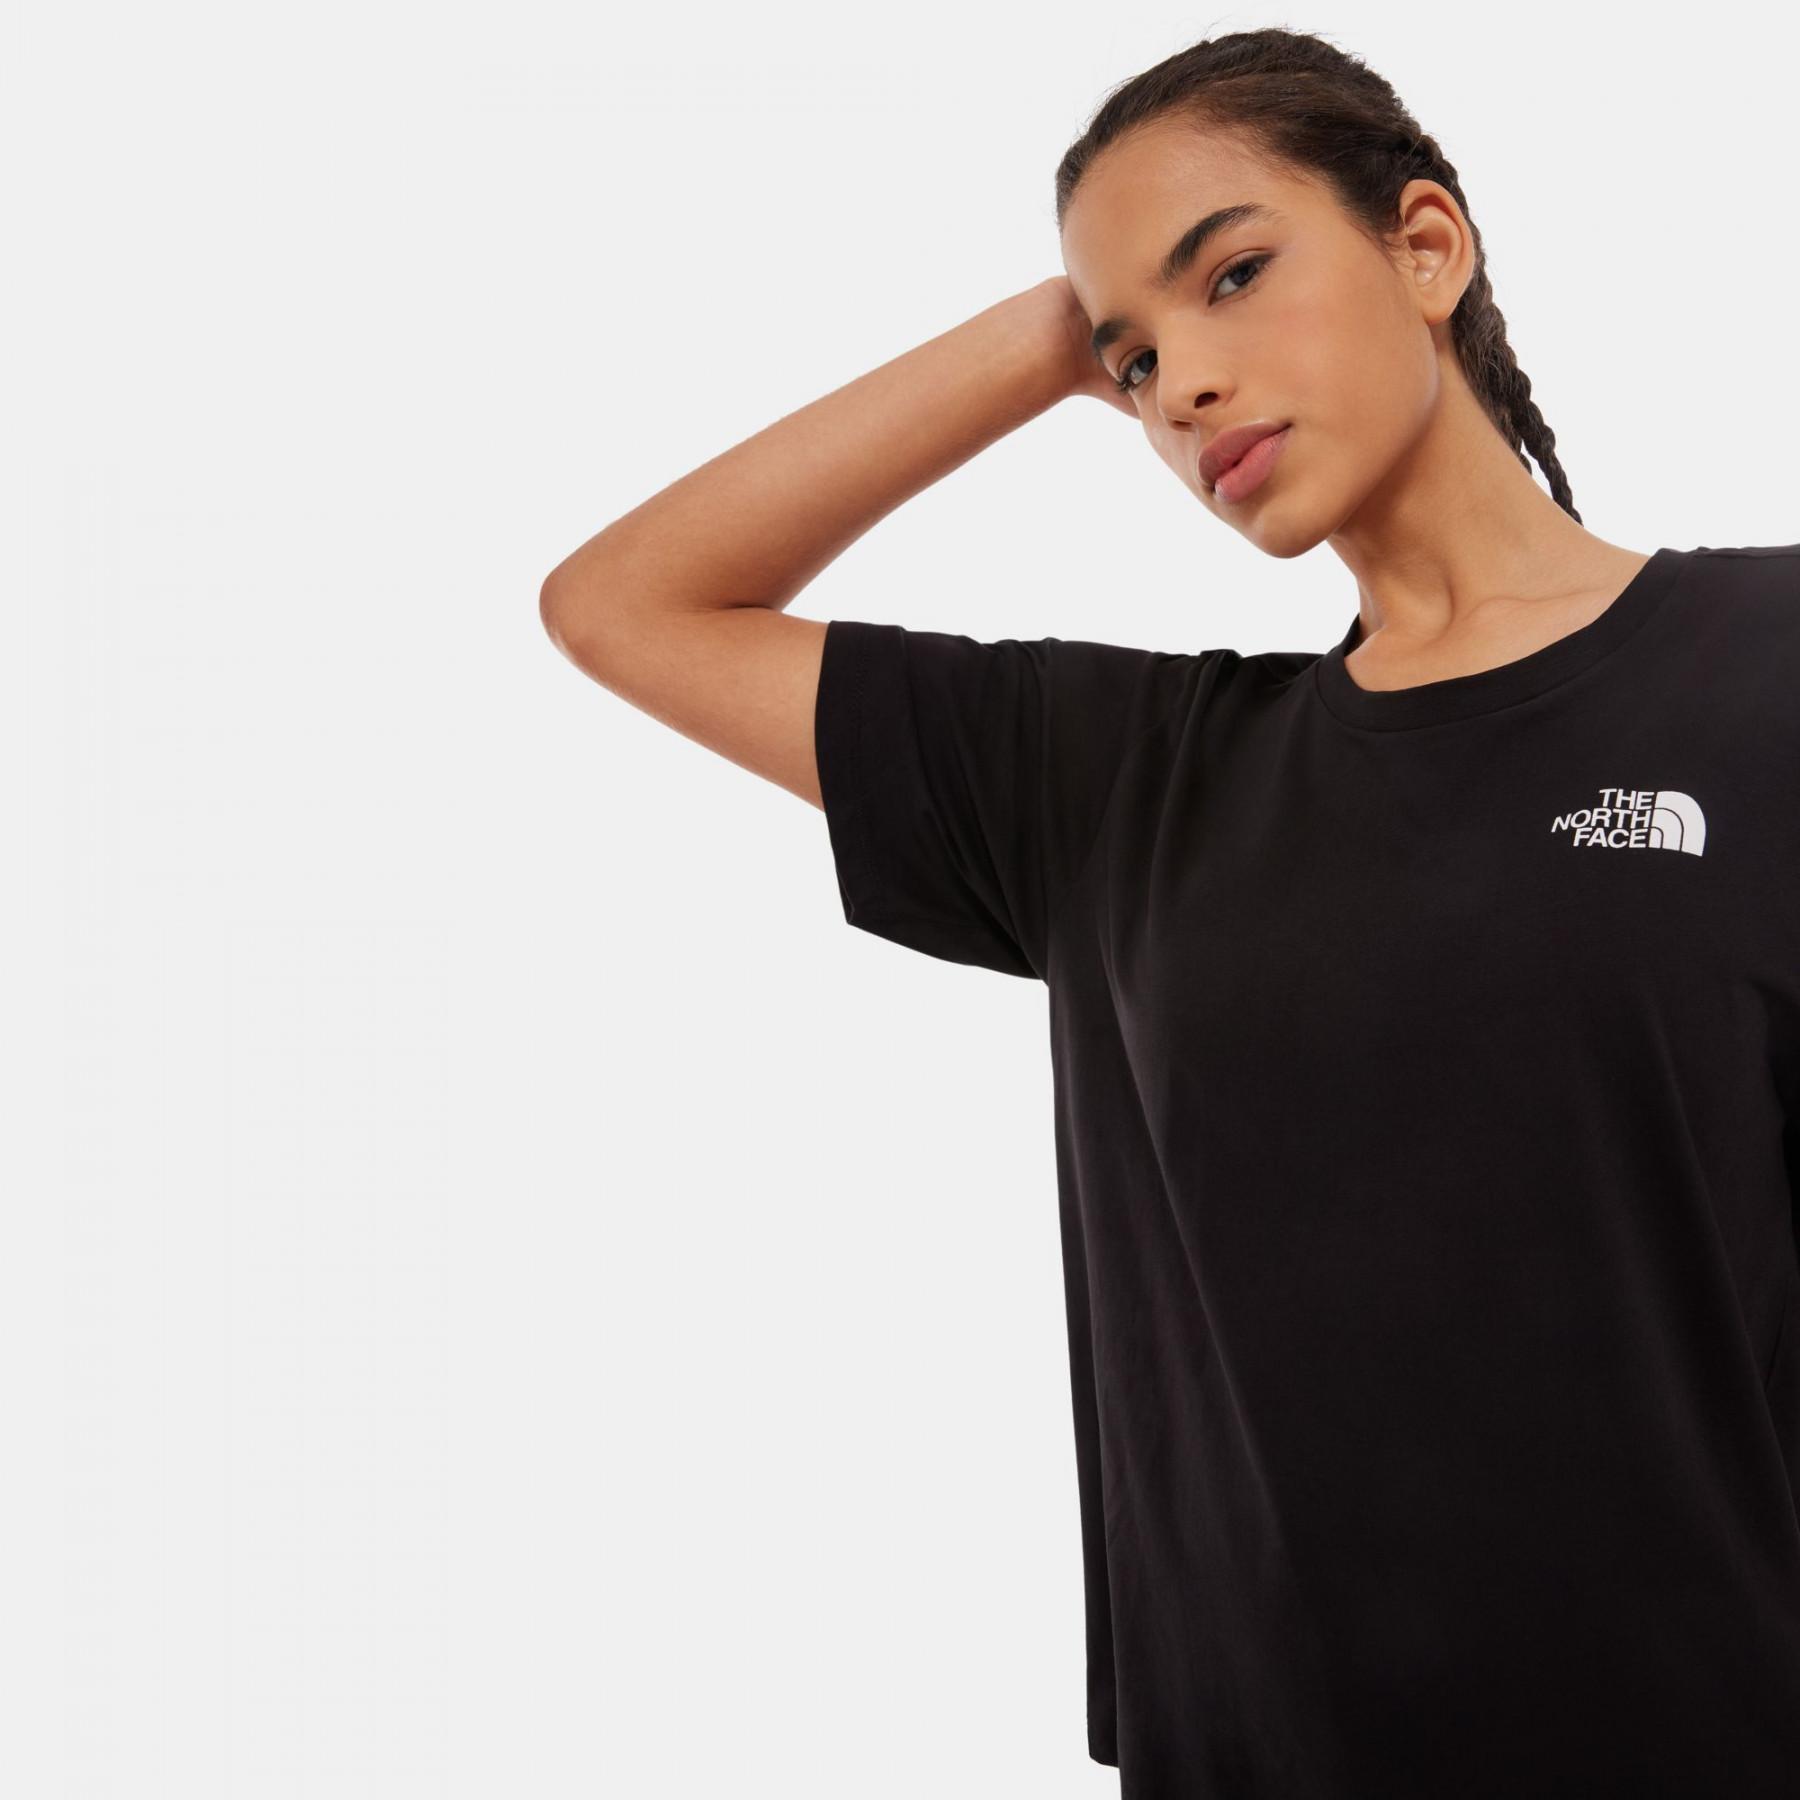 Camiseta de mujer The North Face Bf Simple Dome